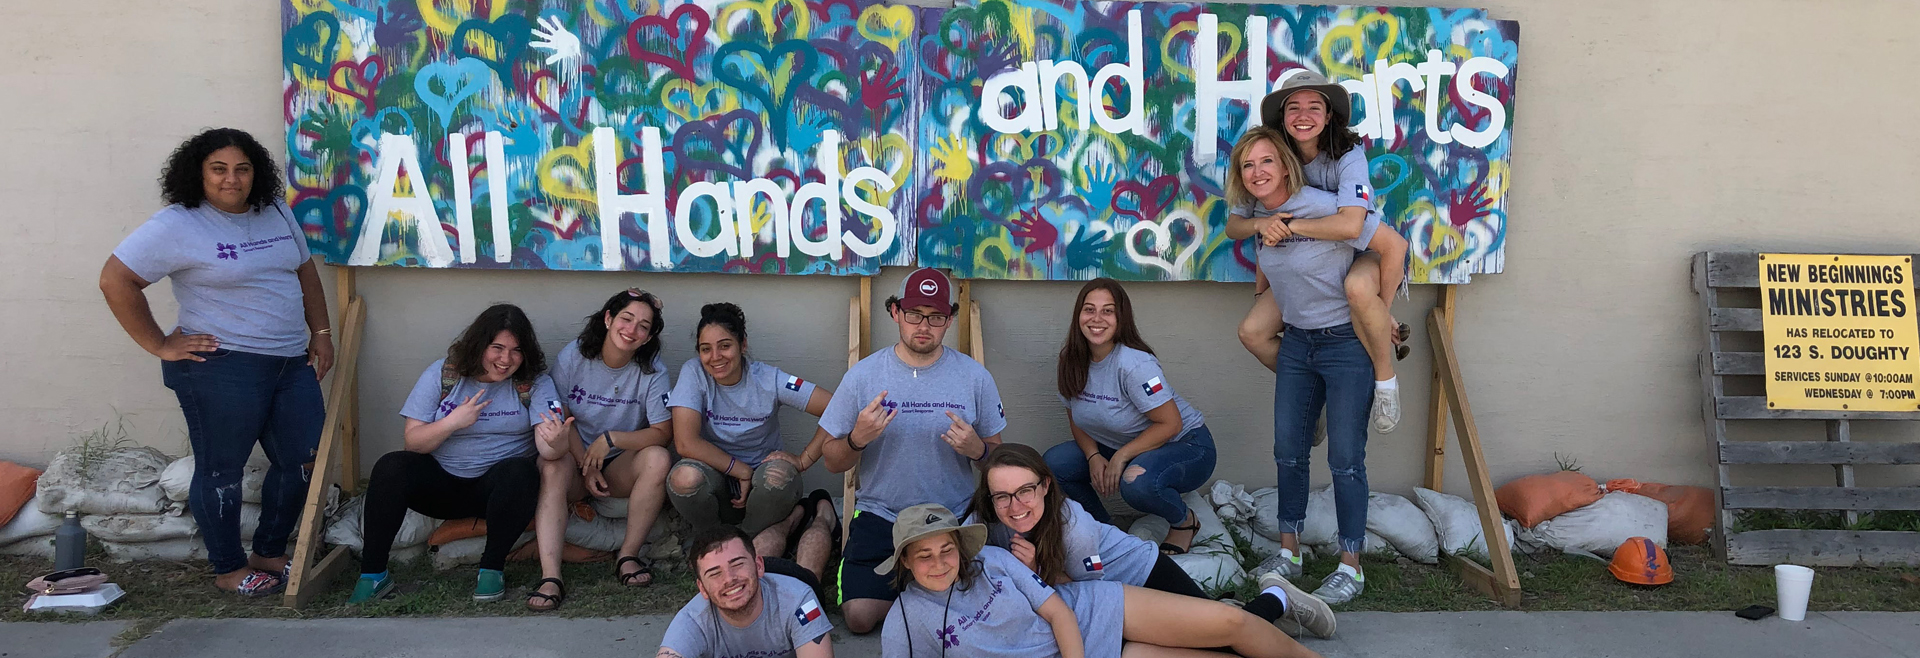 IDMH's Director, Amy Nitza (pictured right standing), with the other SUNY students who travelled to Coastal Bend, Texas to assist All Hands and Hearts in repairing homes which still require repair after Hurricane Harvey hit the region in 2017.